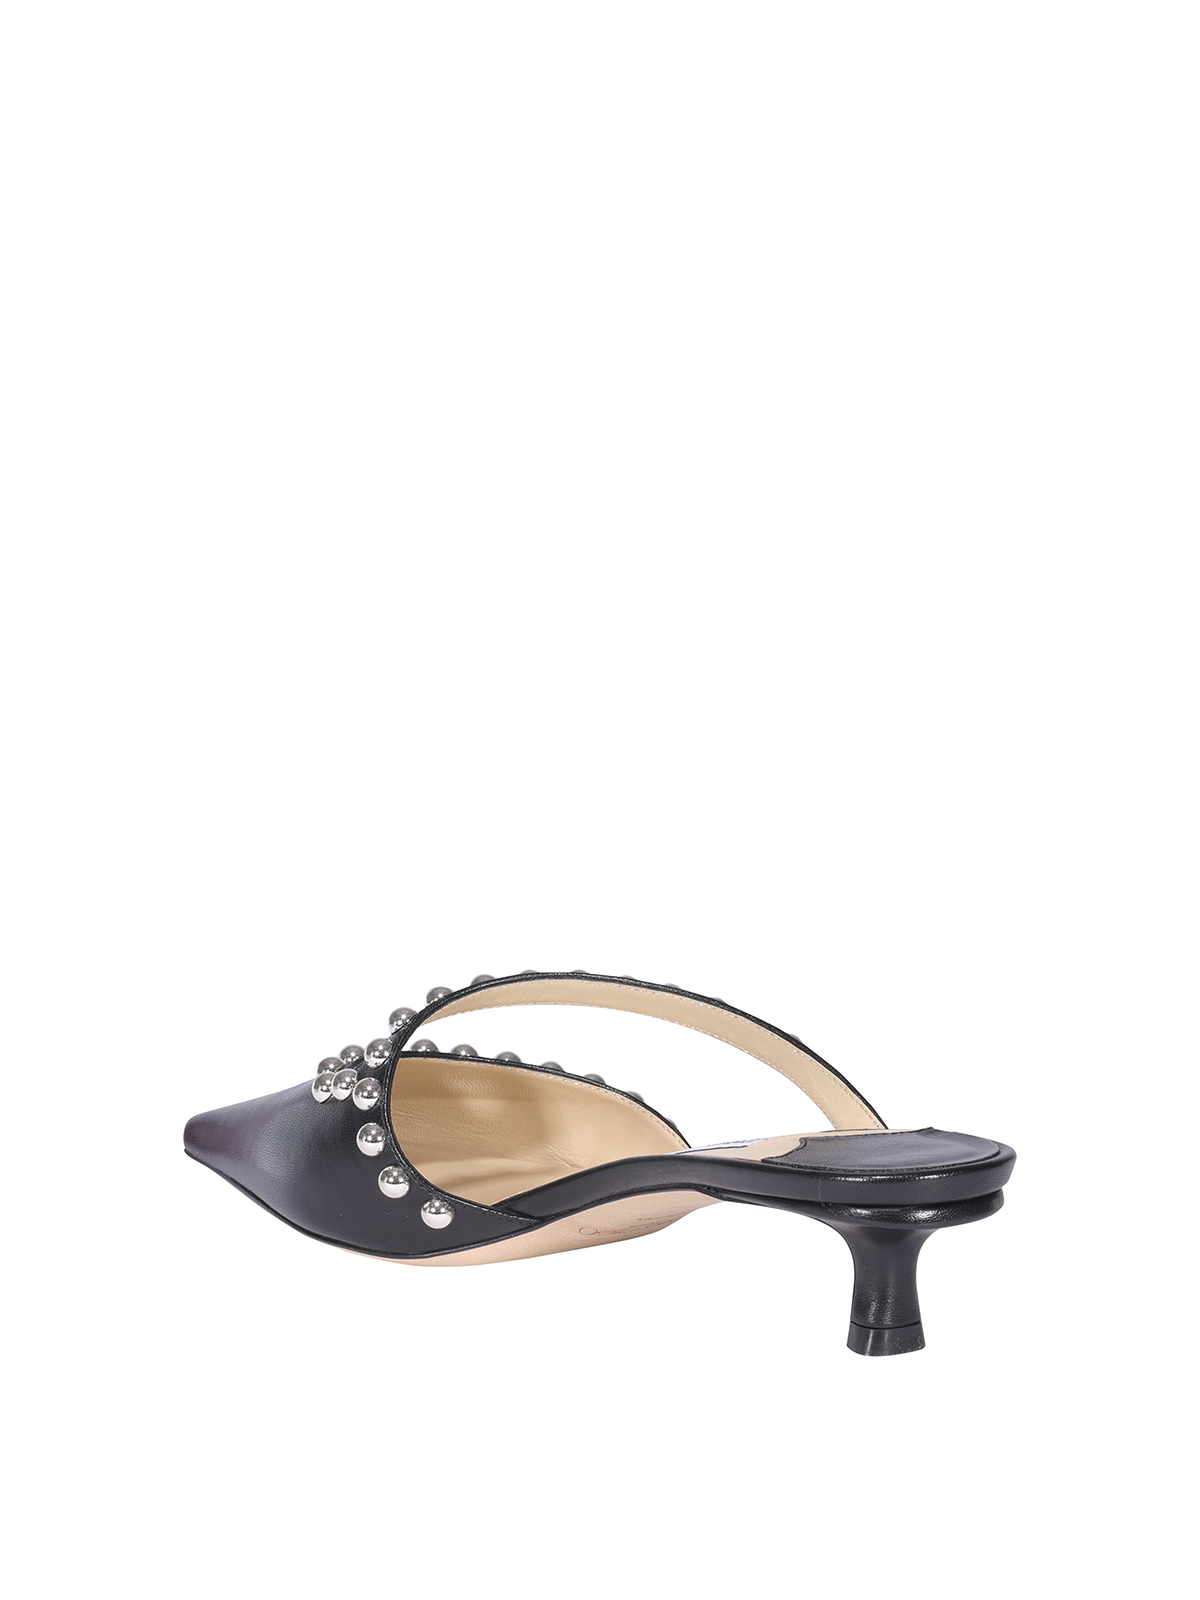 Mules shoes Jimmy Choo - Ros 35 mules - ROS35ZMZBLACKSILVER 